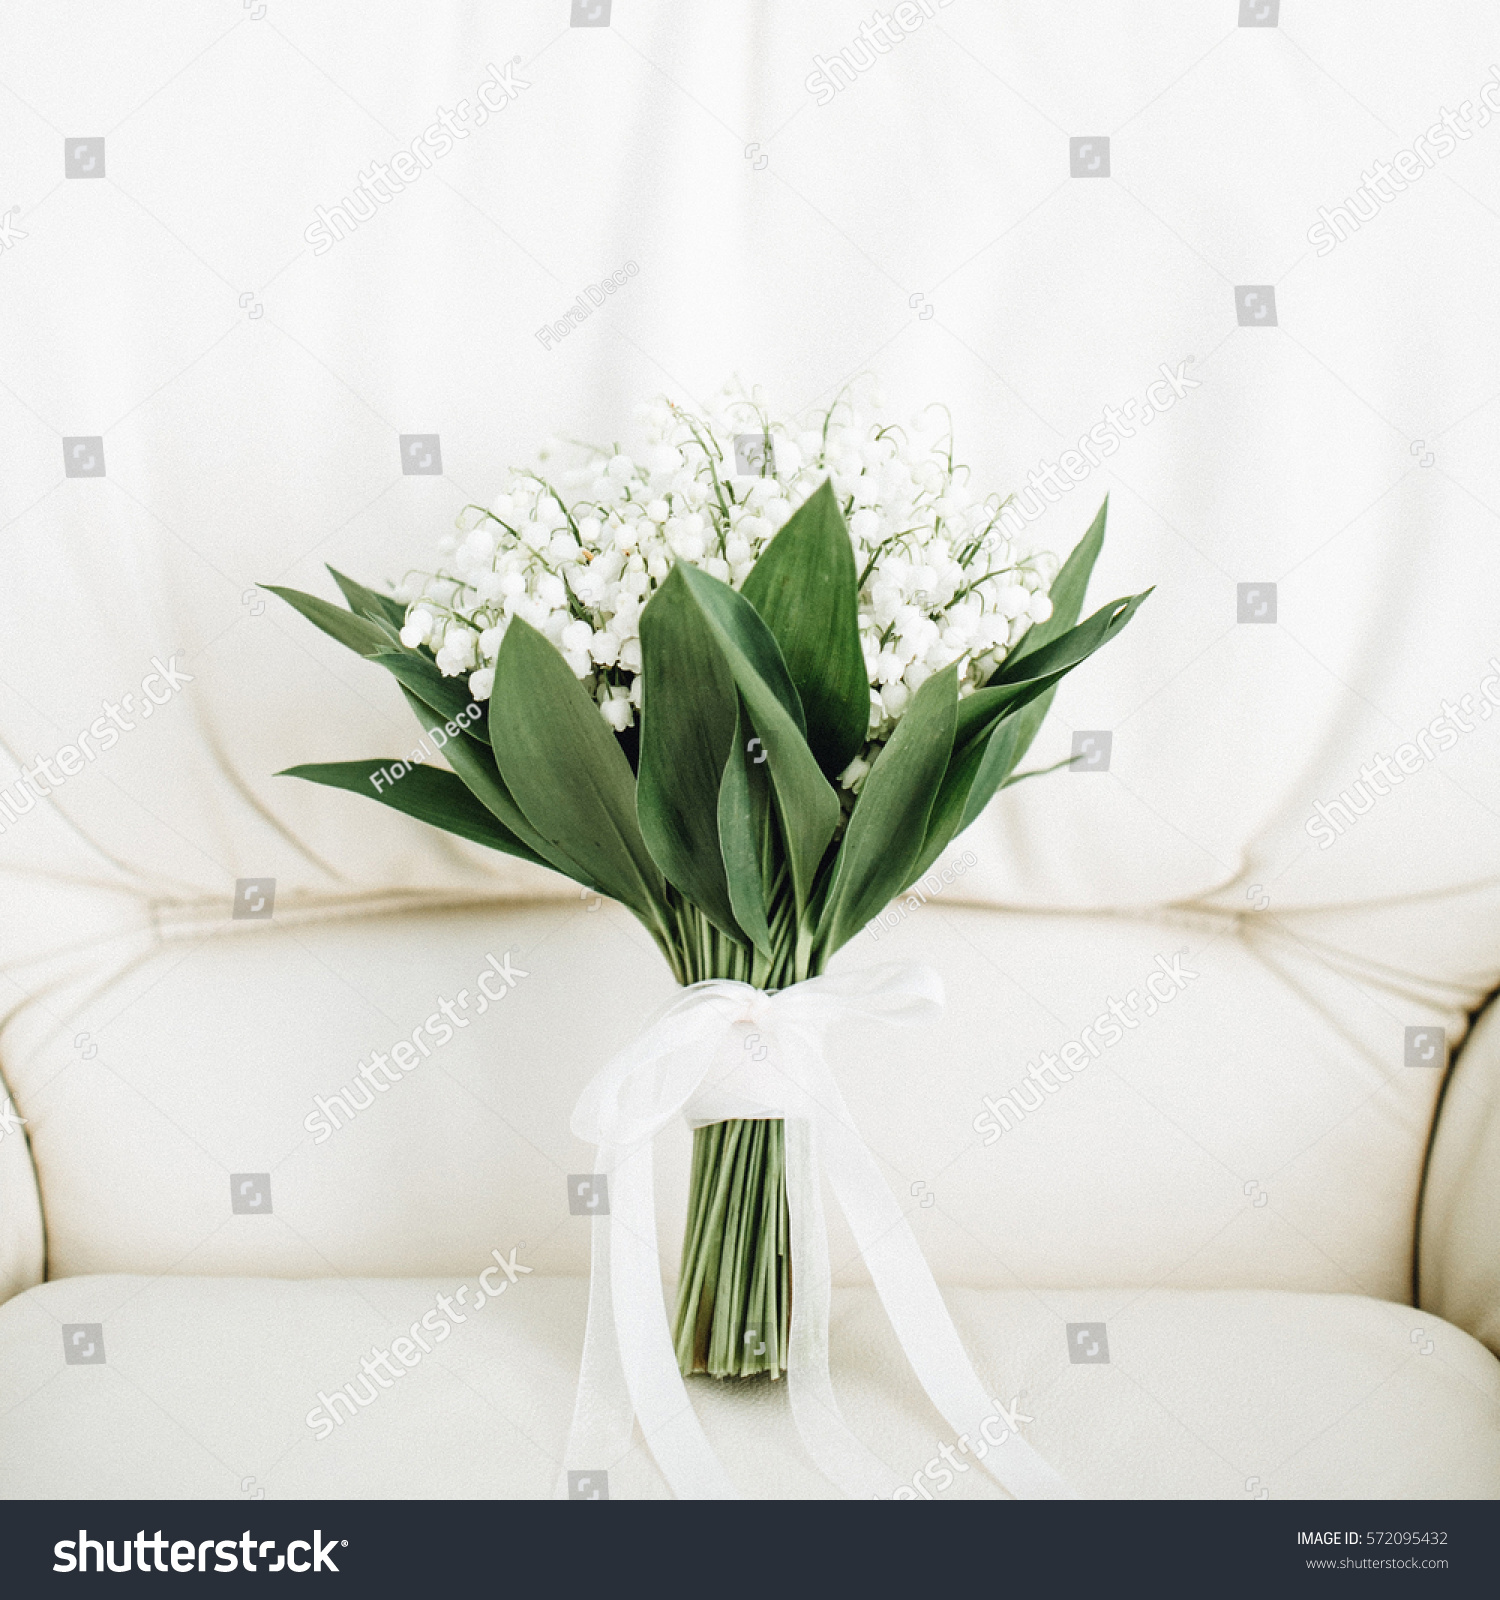 Beauty wedding bouquet of lilies of the valley #572095432